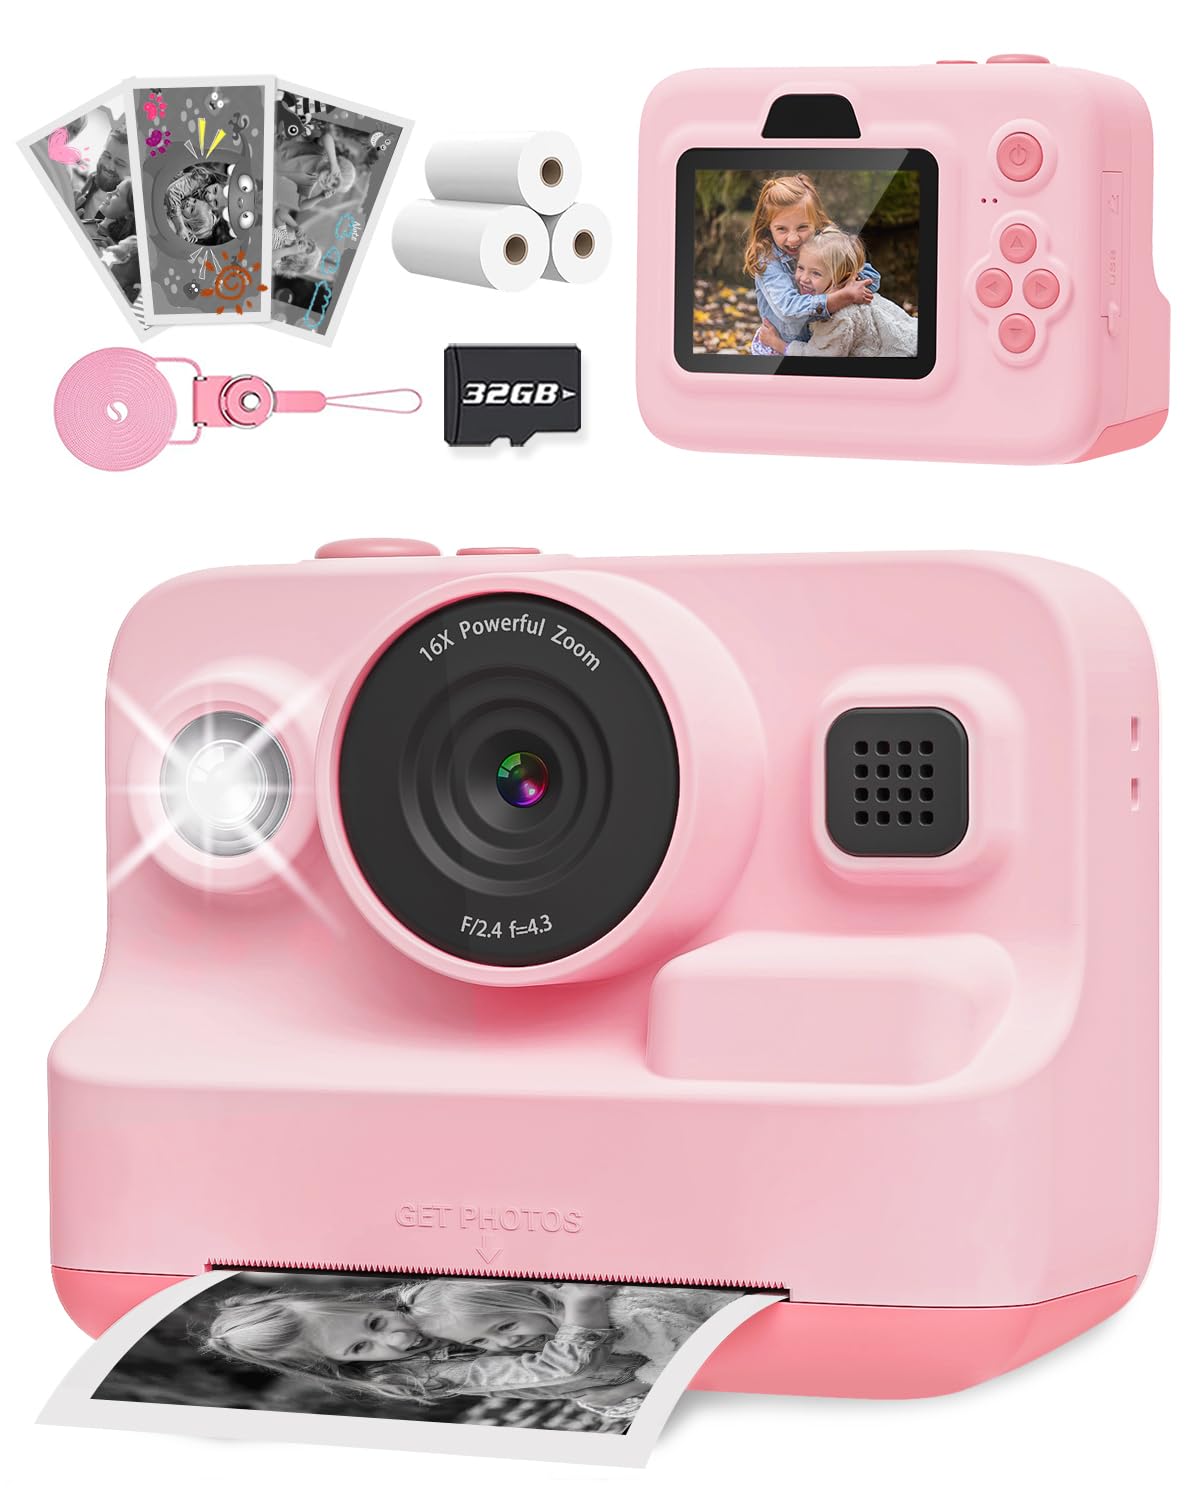 Anchioo Instant Print Camera for Kids,2.4 Inch Screen Kids Camera for Girls with Zero Ink Print Paper,Birthday Gift for Girls Boys Age 3-12,1080P Instant Camera Toys for 3 4 5 6 7 8 Year Old Girl-Pink